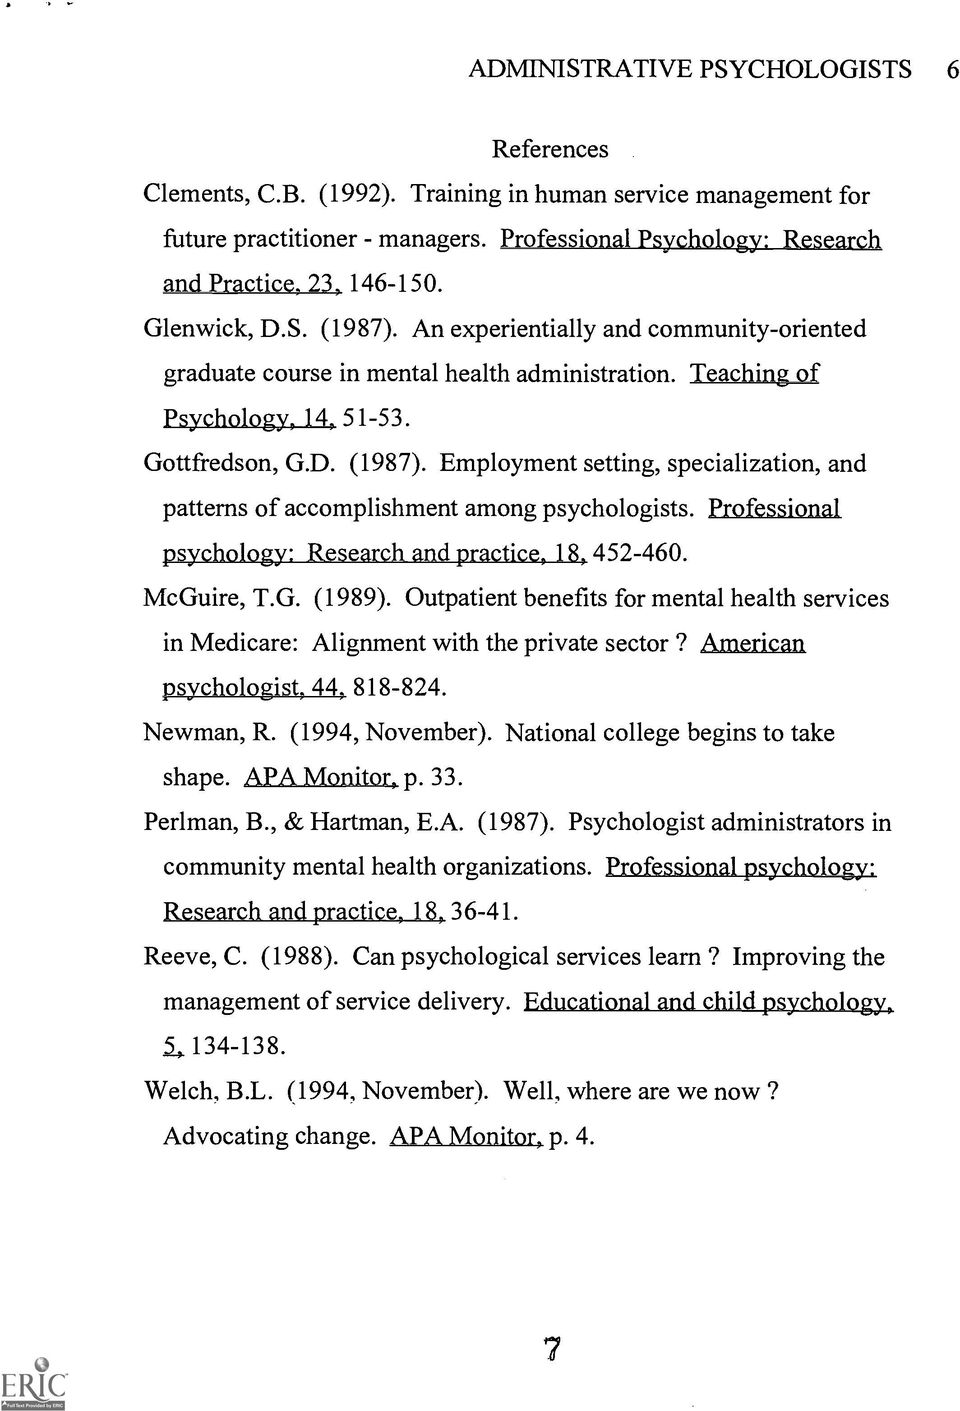 Professional psychology: Research and practice, 18, 452-460. McGuire, T.G. (1989). Outpatient benefits for mental health services in Medicare: Alignment with the private sector?